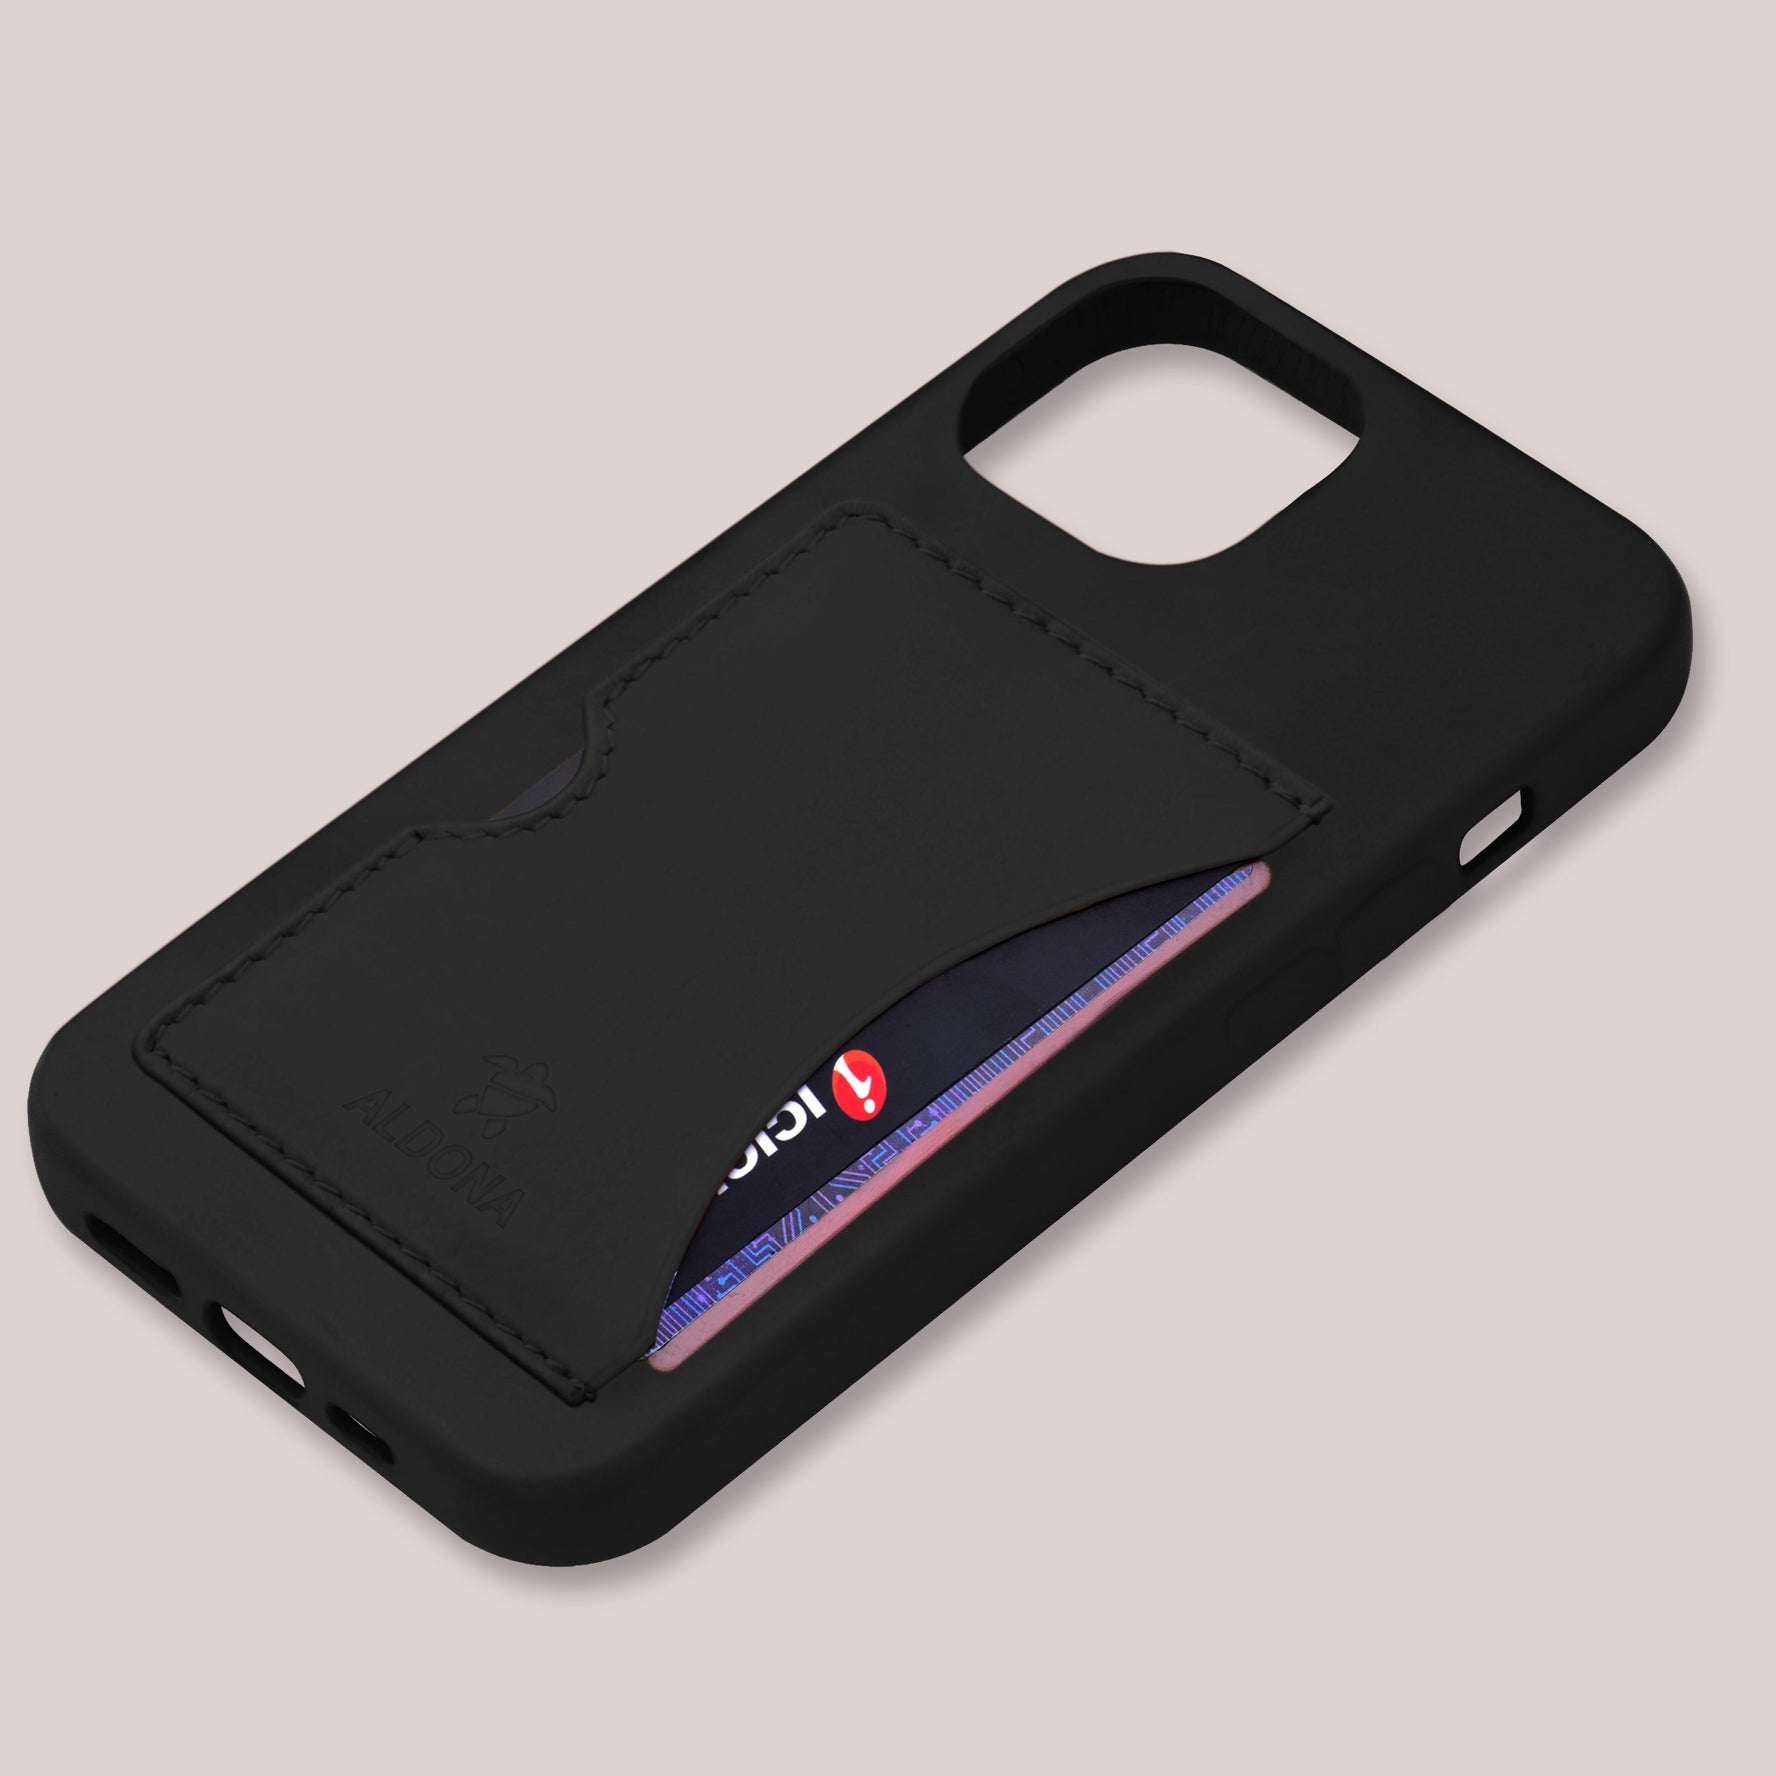 Baxter Card Case for iPhone 12 Pro Max - Onyx Black